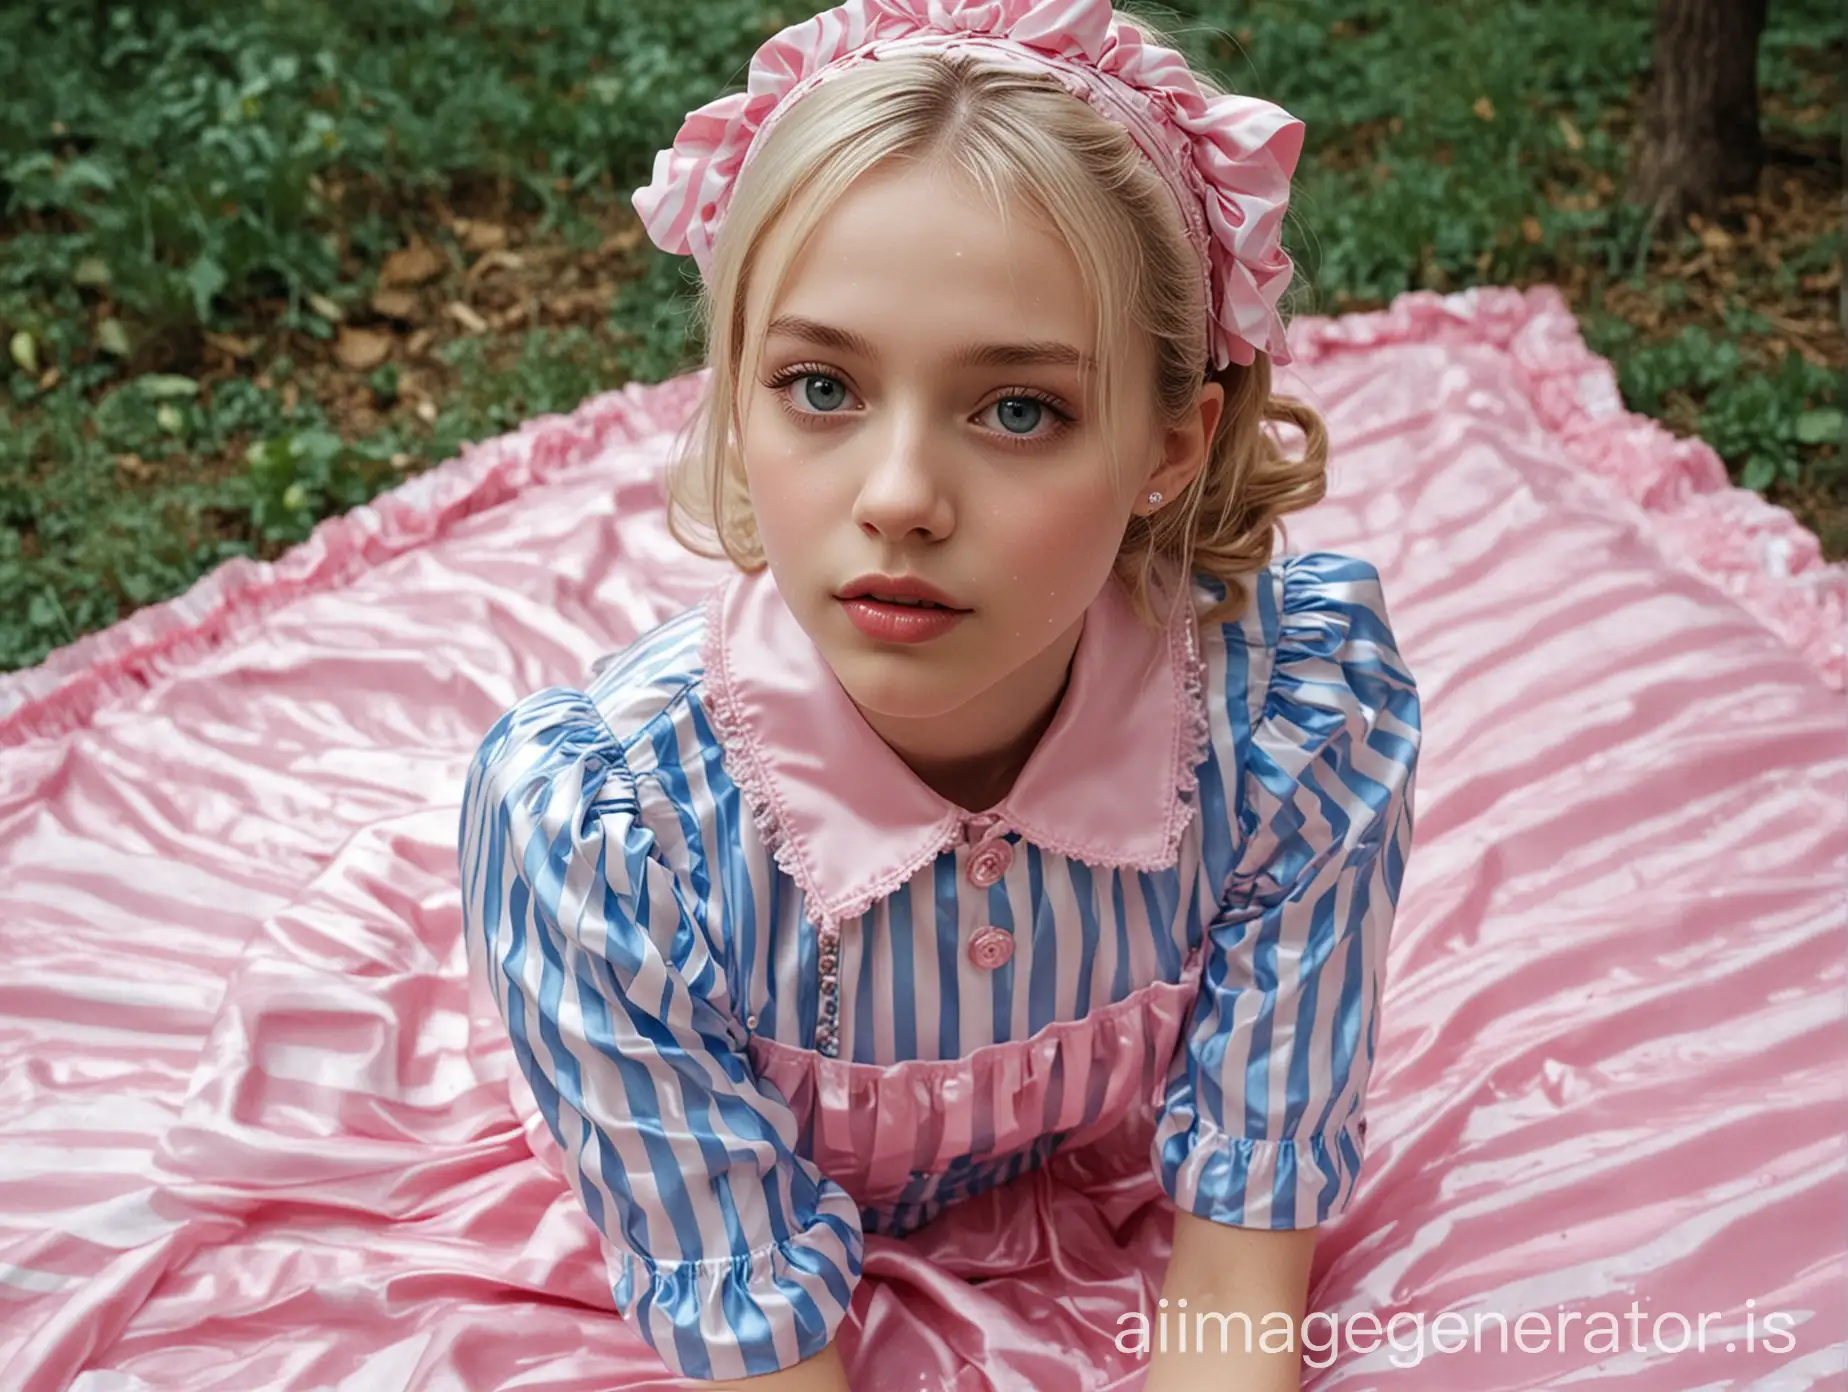 hyperrealistic image. highest quality. french girl on her tenth birthday. very skinny, very white skin. wearing a sweet lolita outfit. collared and closed very high. it is striped in blue and pink and made of the shiniest satin. over the dress she wears a shiny latex apron. the girl is lying on a satin sheet alone in the forest in a heavy summer rain. face and clothes are already wet by the rain. mouth wide open. lips very shiny by the shinest lipgloss. she wears not any jewellery